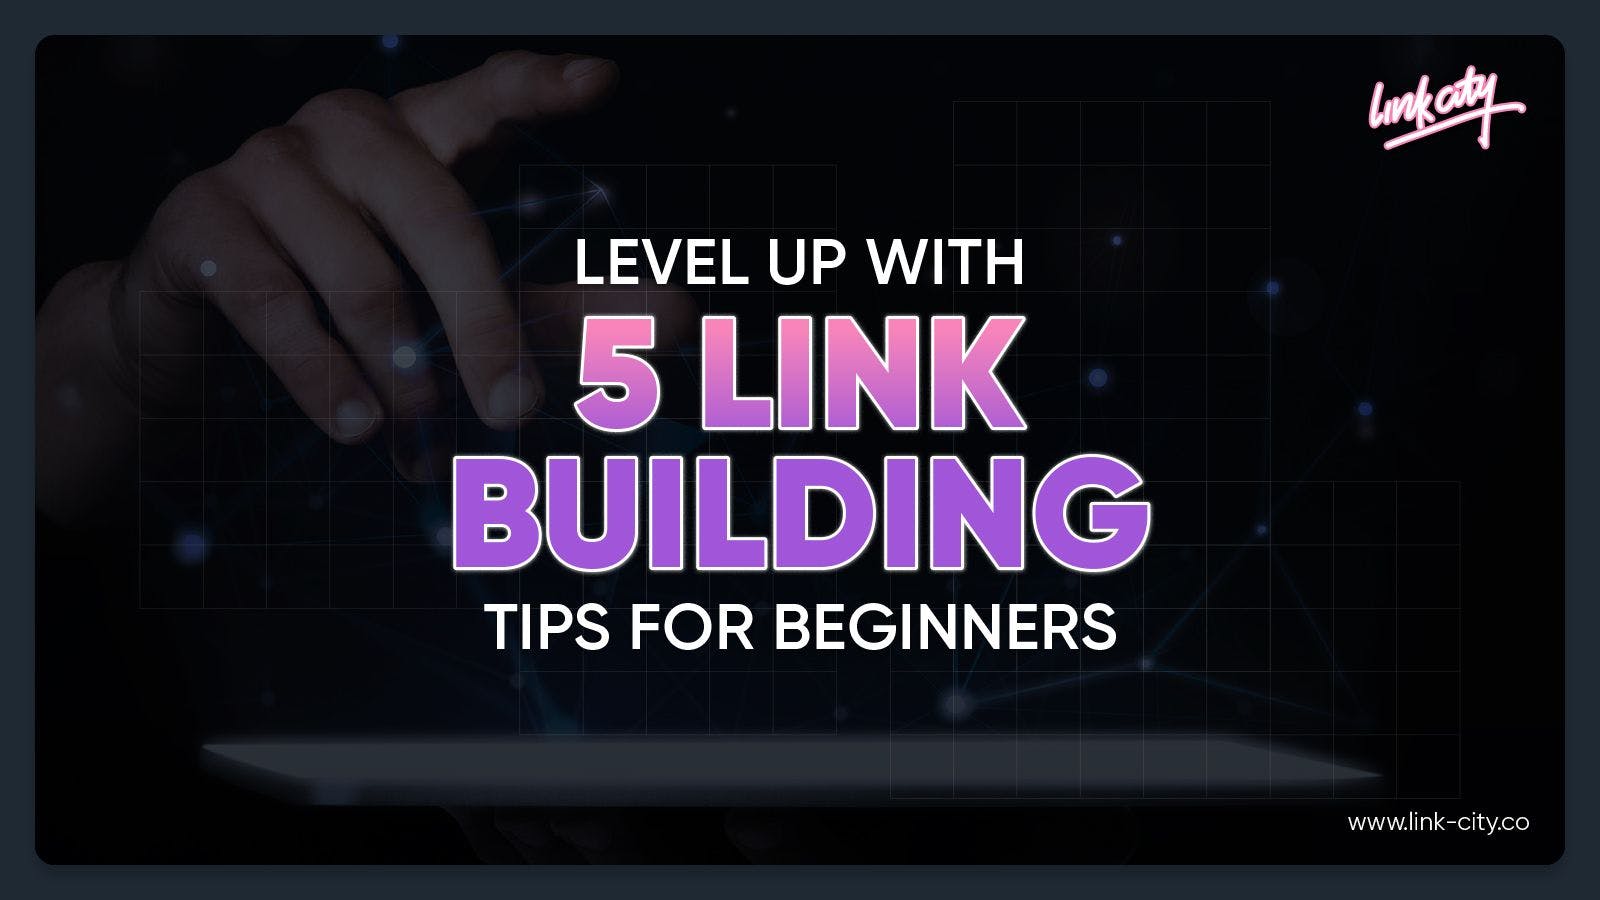 Level Up With 5 Link Building Tips For Beginners